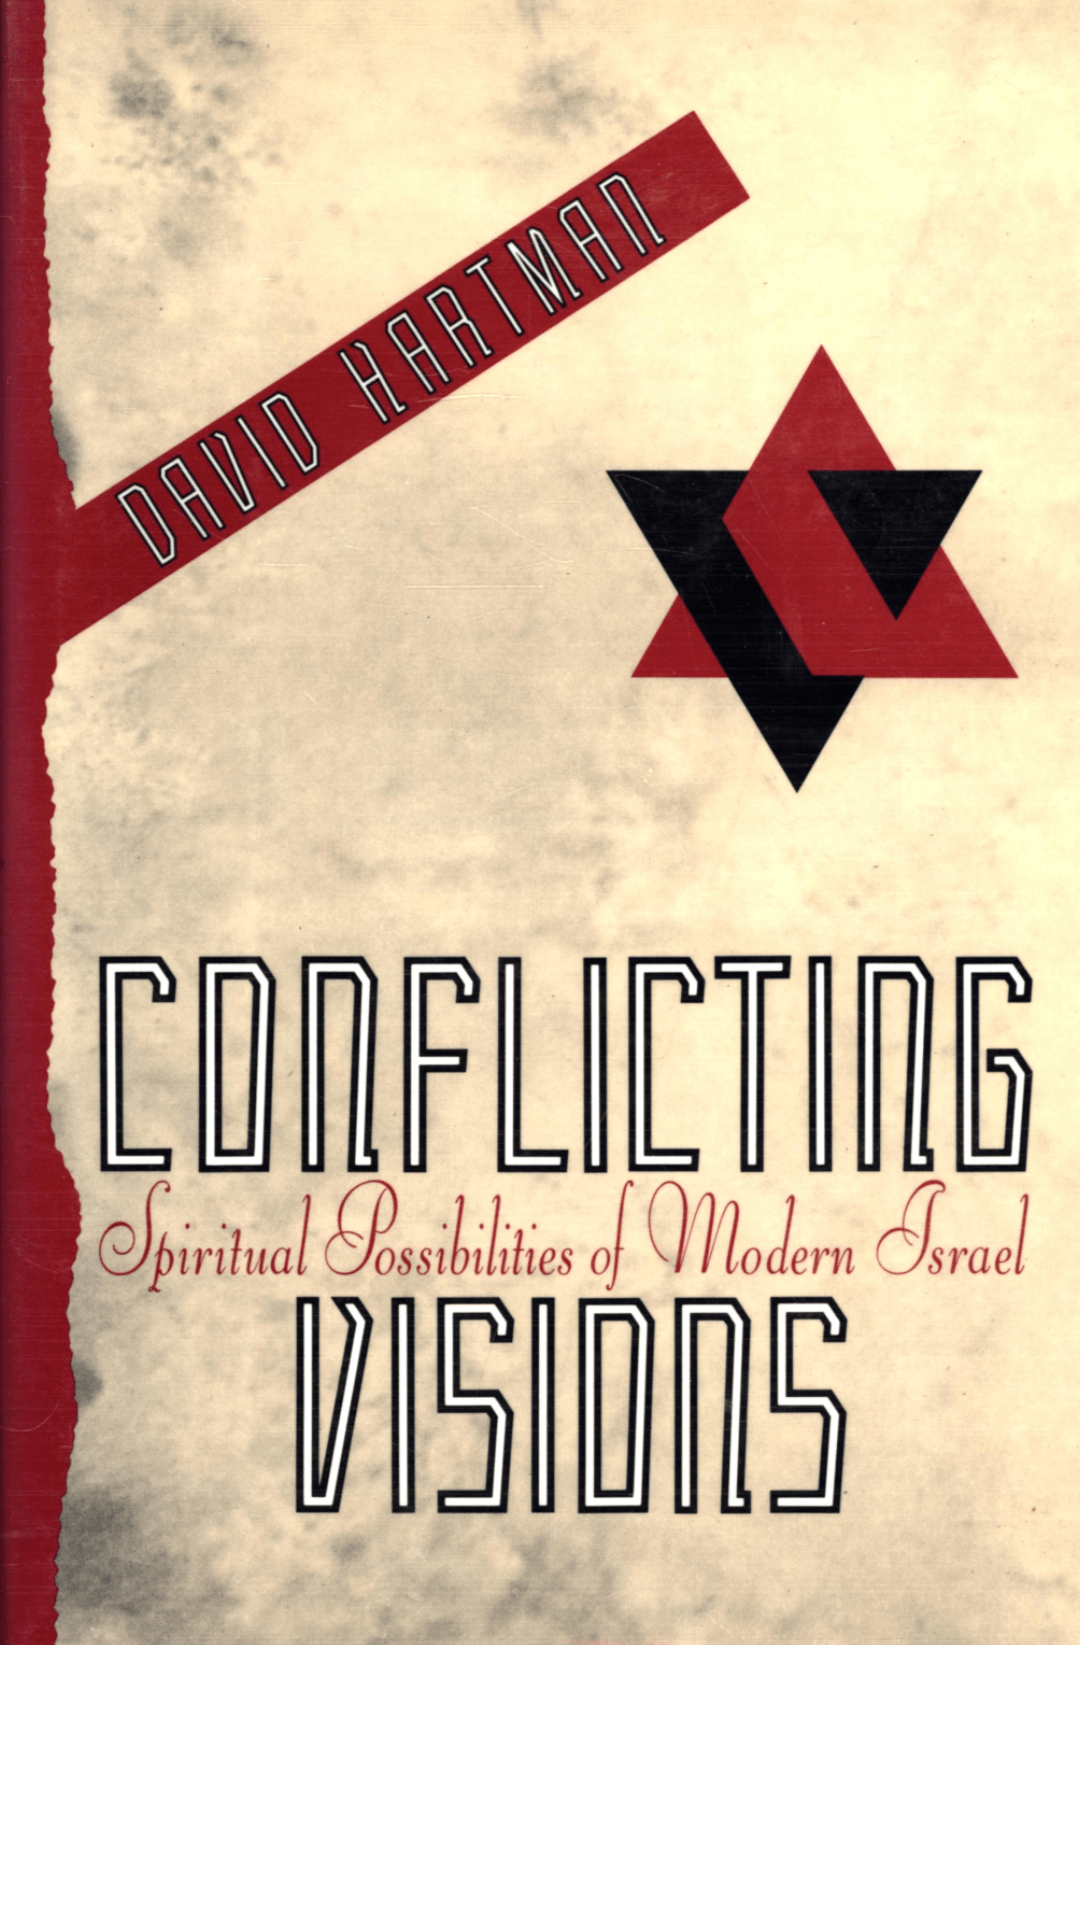 Conflicting Visions: Spiritual Possibilities of Modern Israel